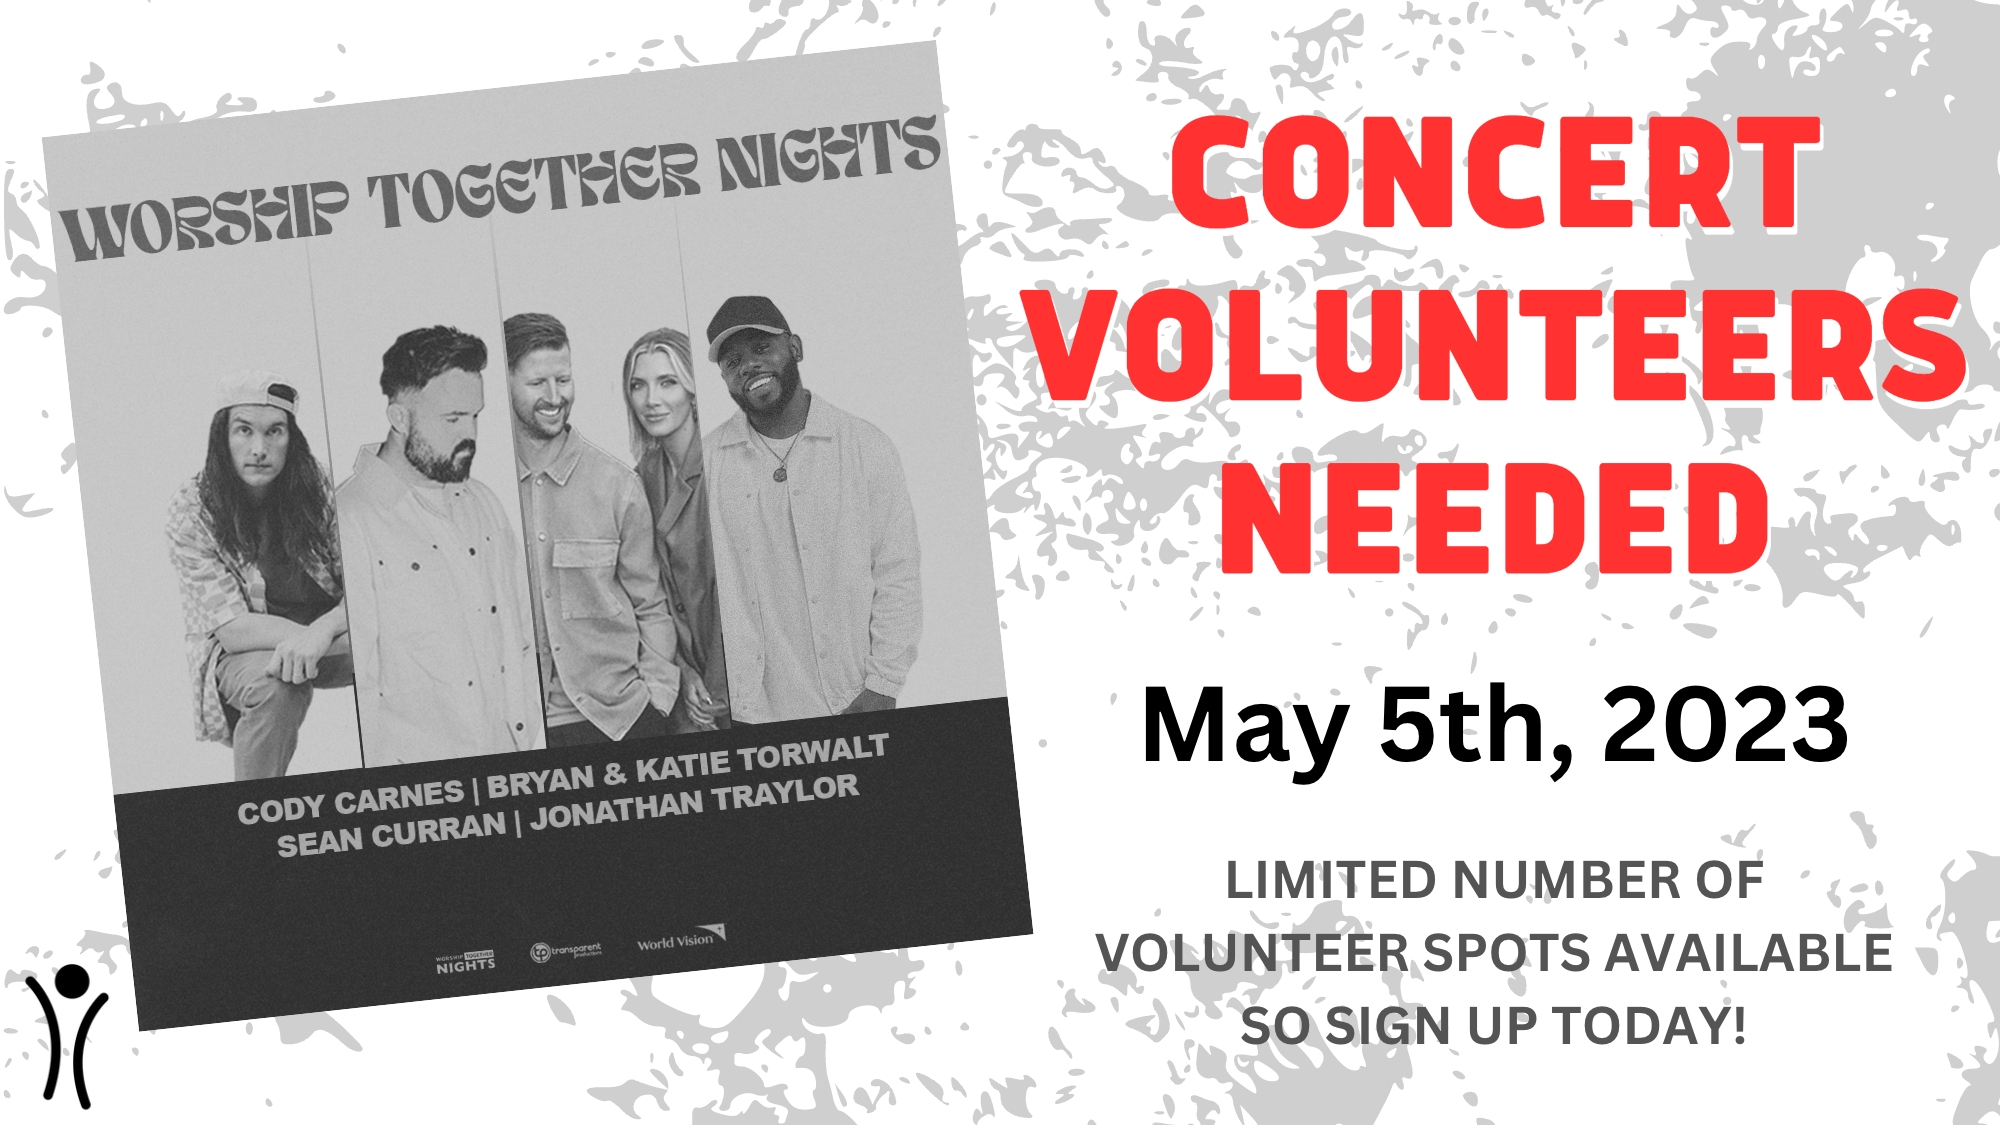 Featured image for Worship Together Nights Tour – Volunteers